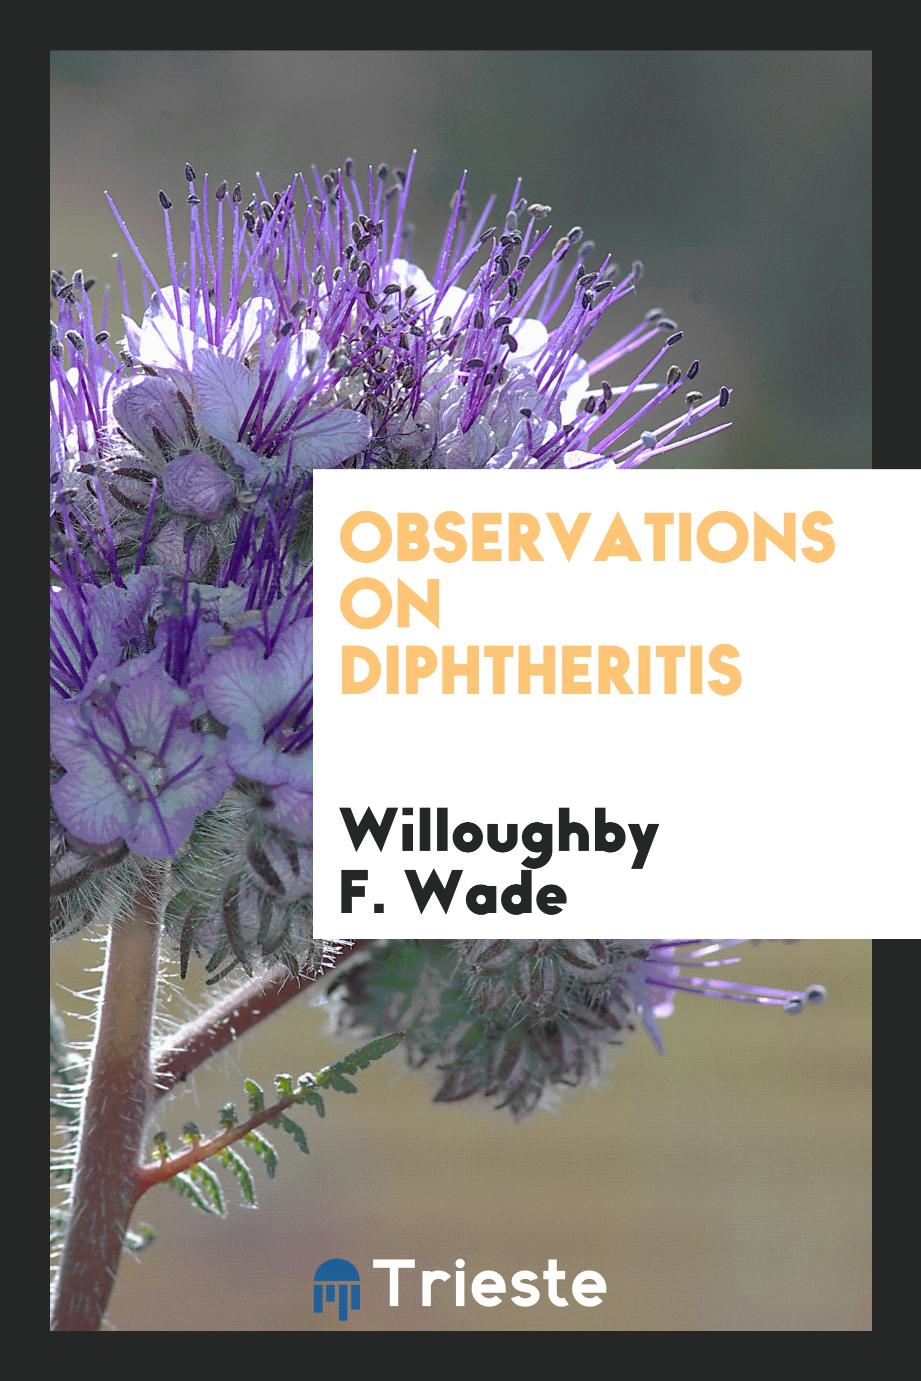 Observations on diphtheritis